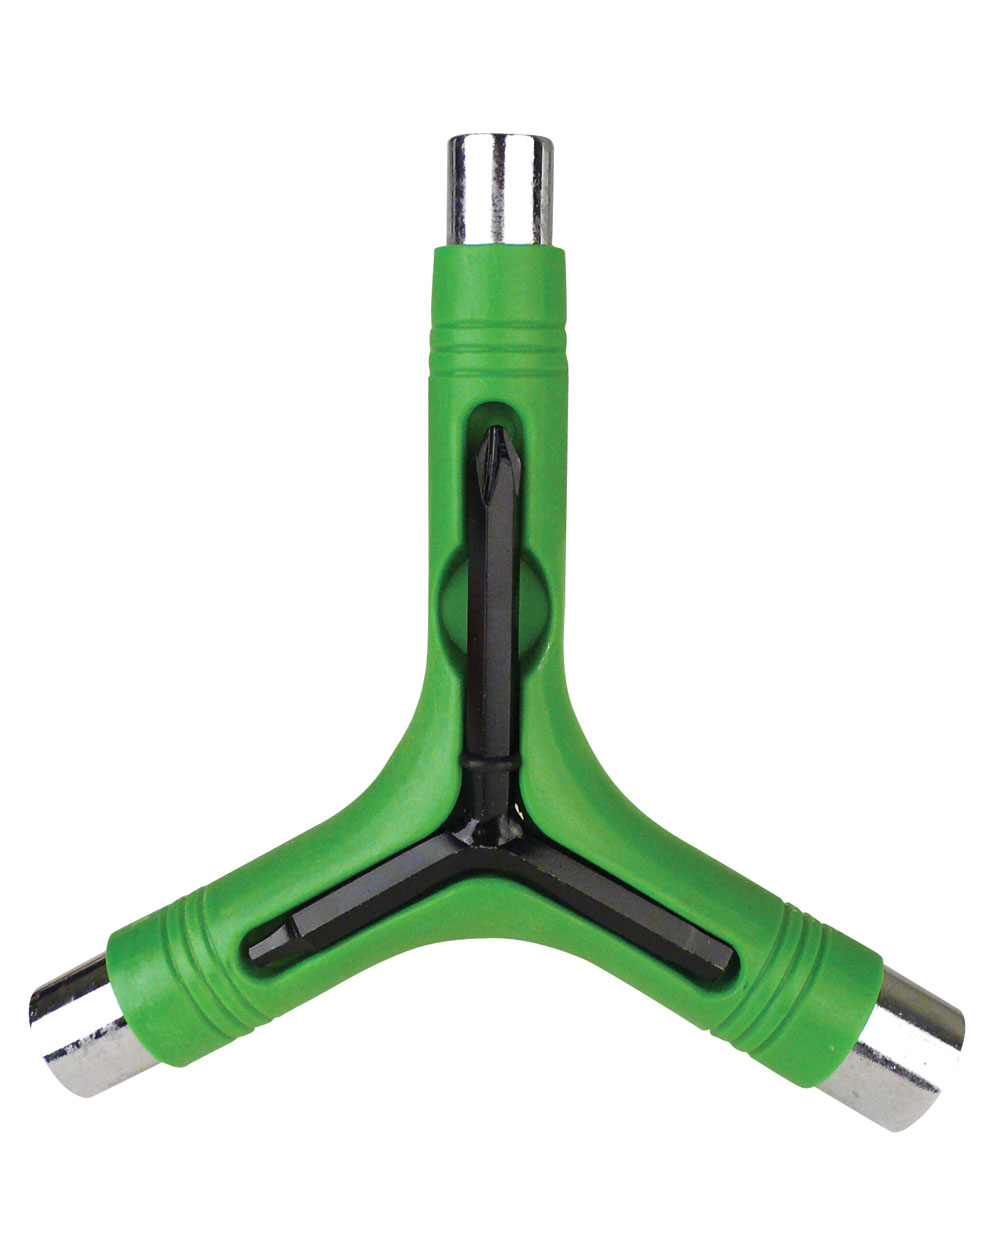 Pig Wheels Chave Skate Pig Tool Green